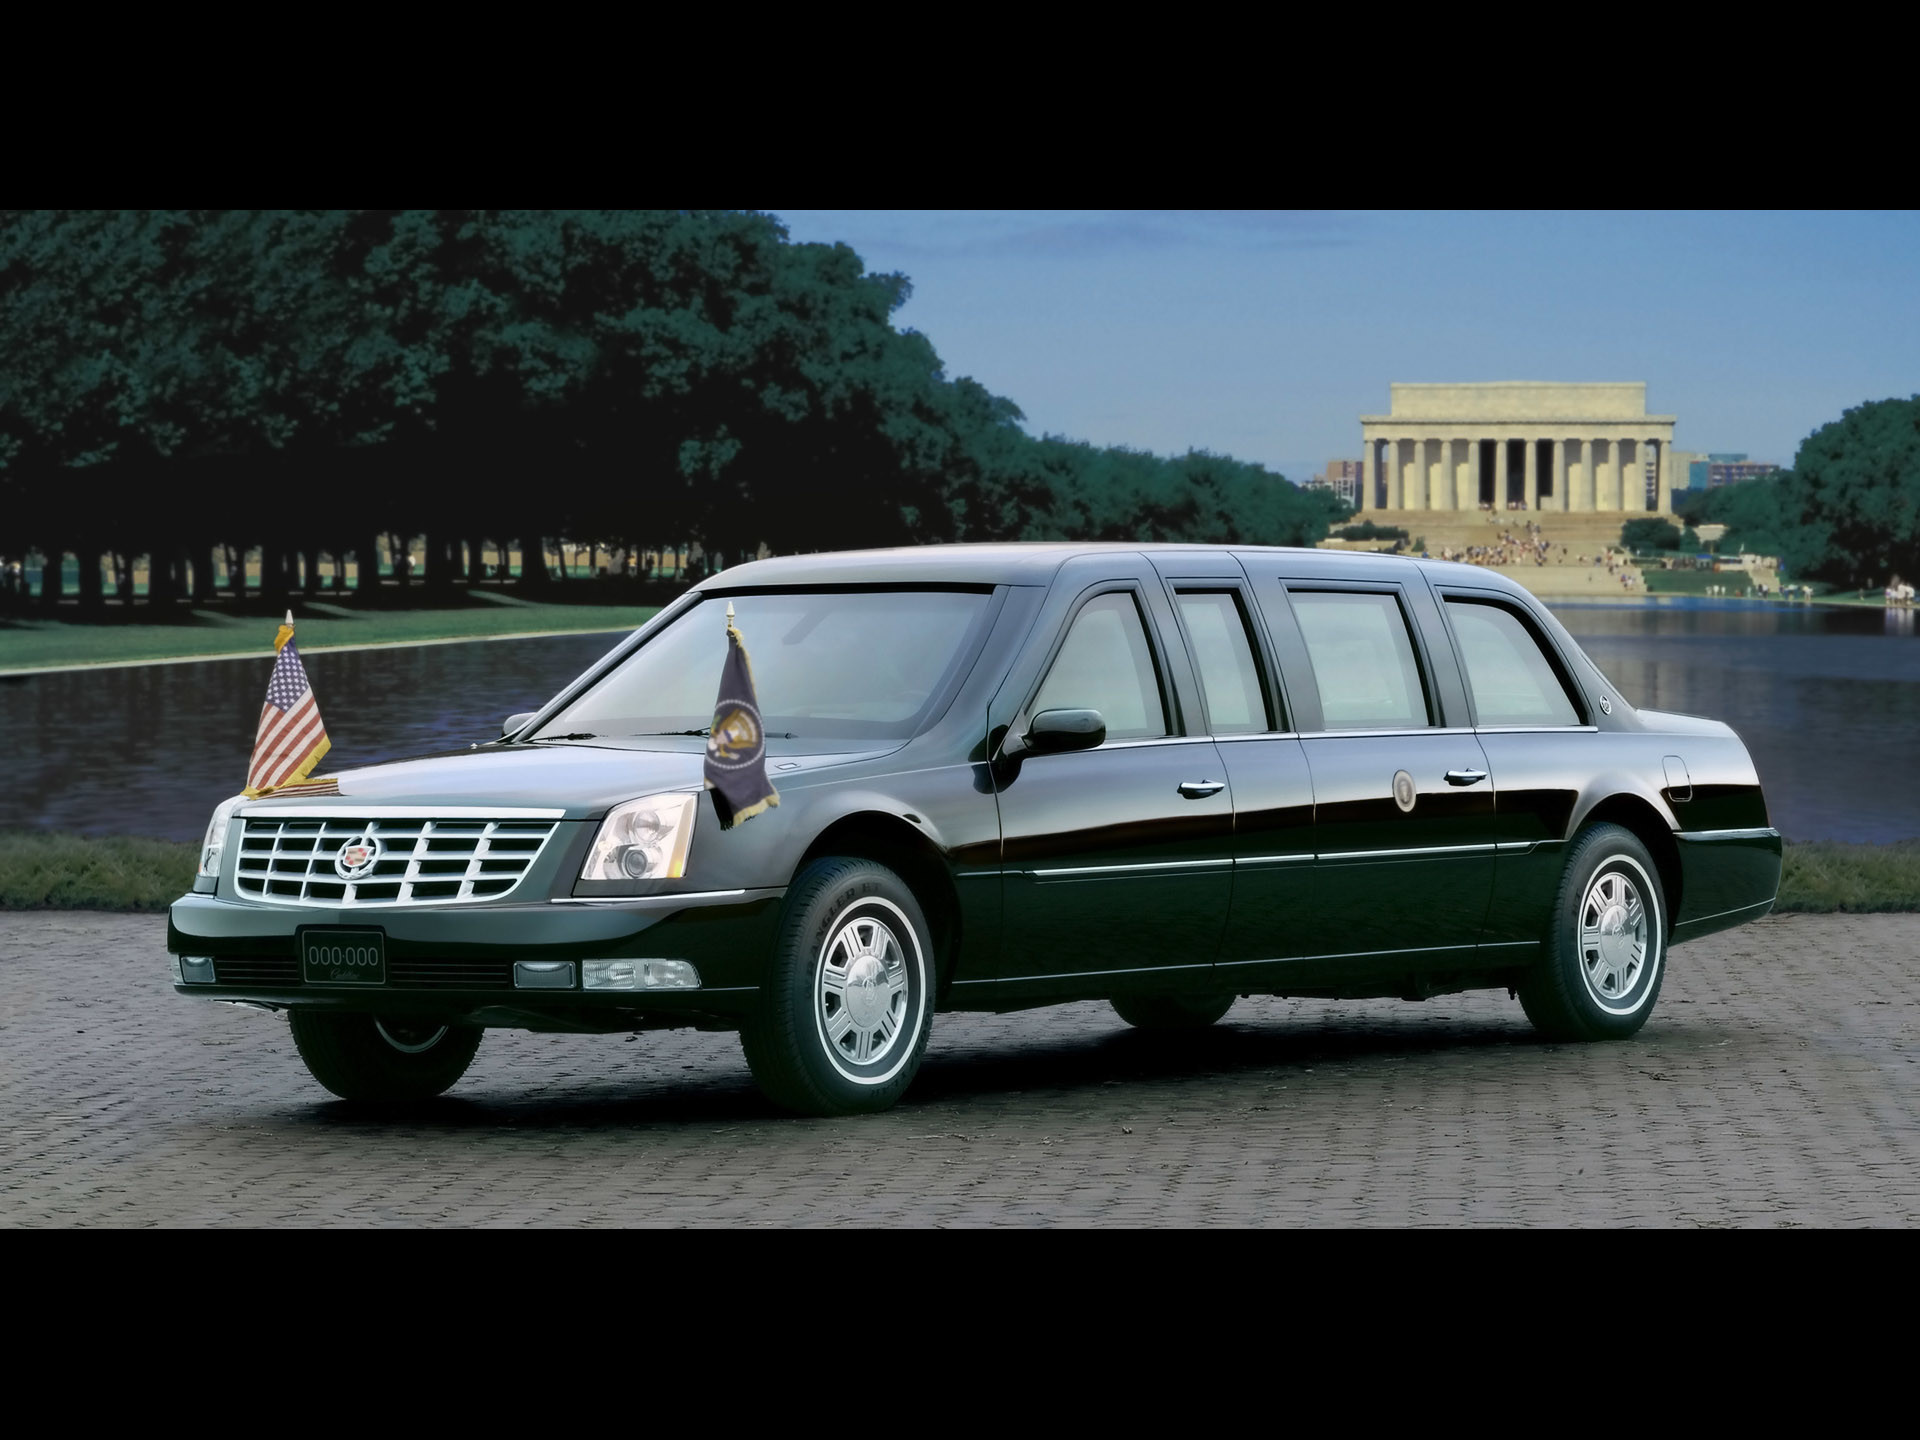 1920x1440 2006 Cadillac DTS Presidential Limousine - Side Angle - Lincoln Memorial -   Wallpaper